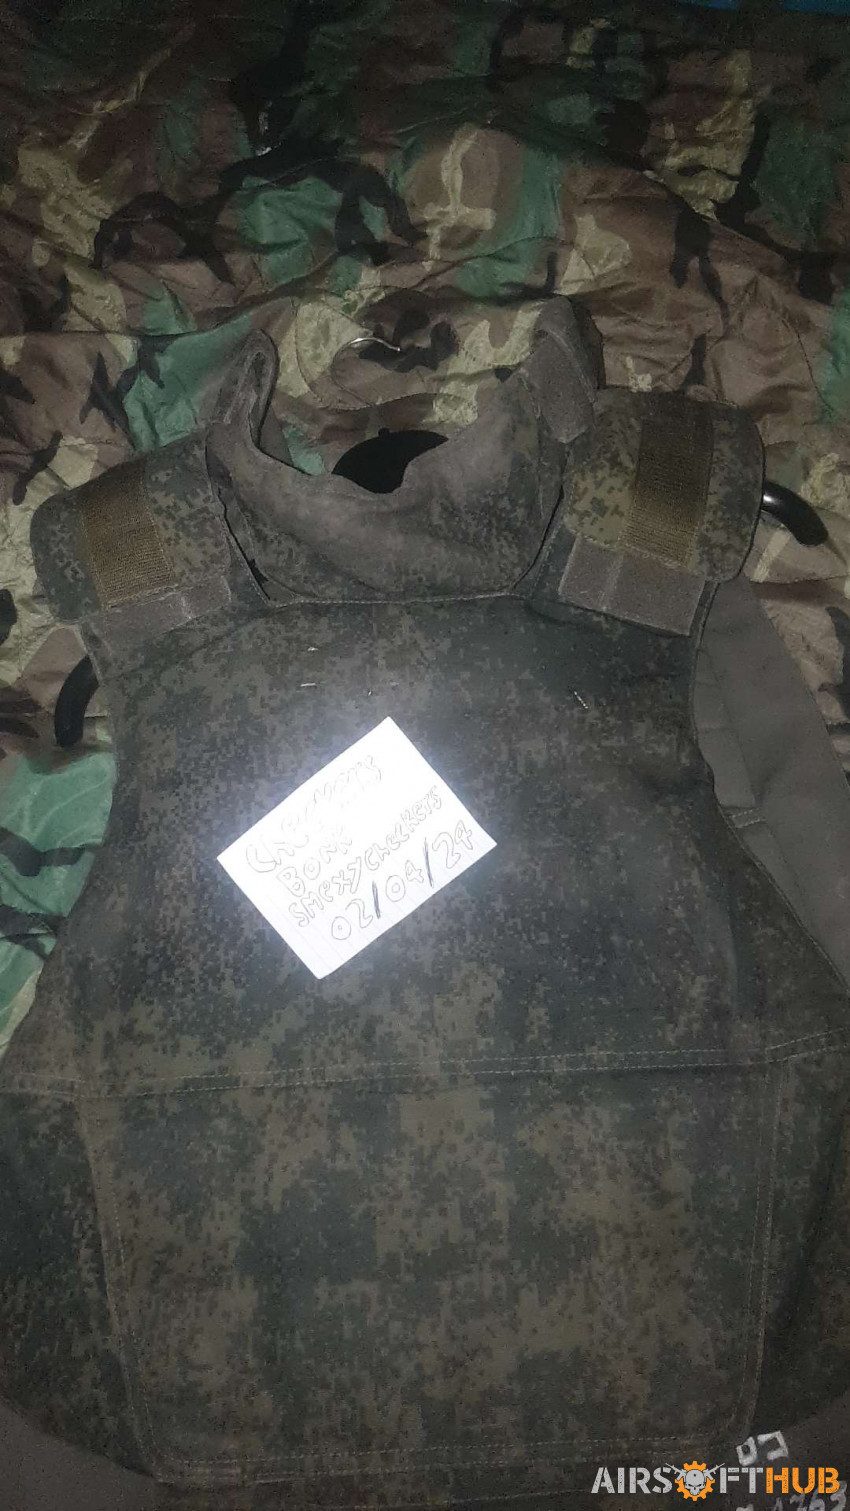 Russian 6B23 body armor - Used airsoft equipment